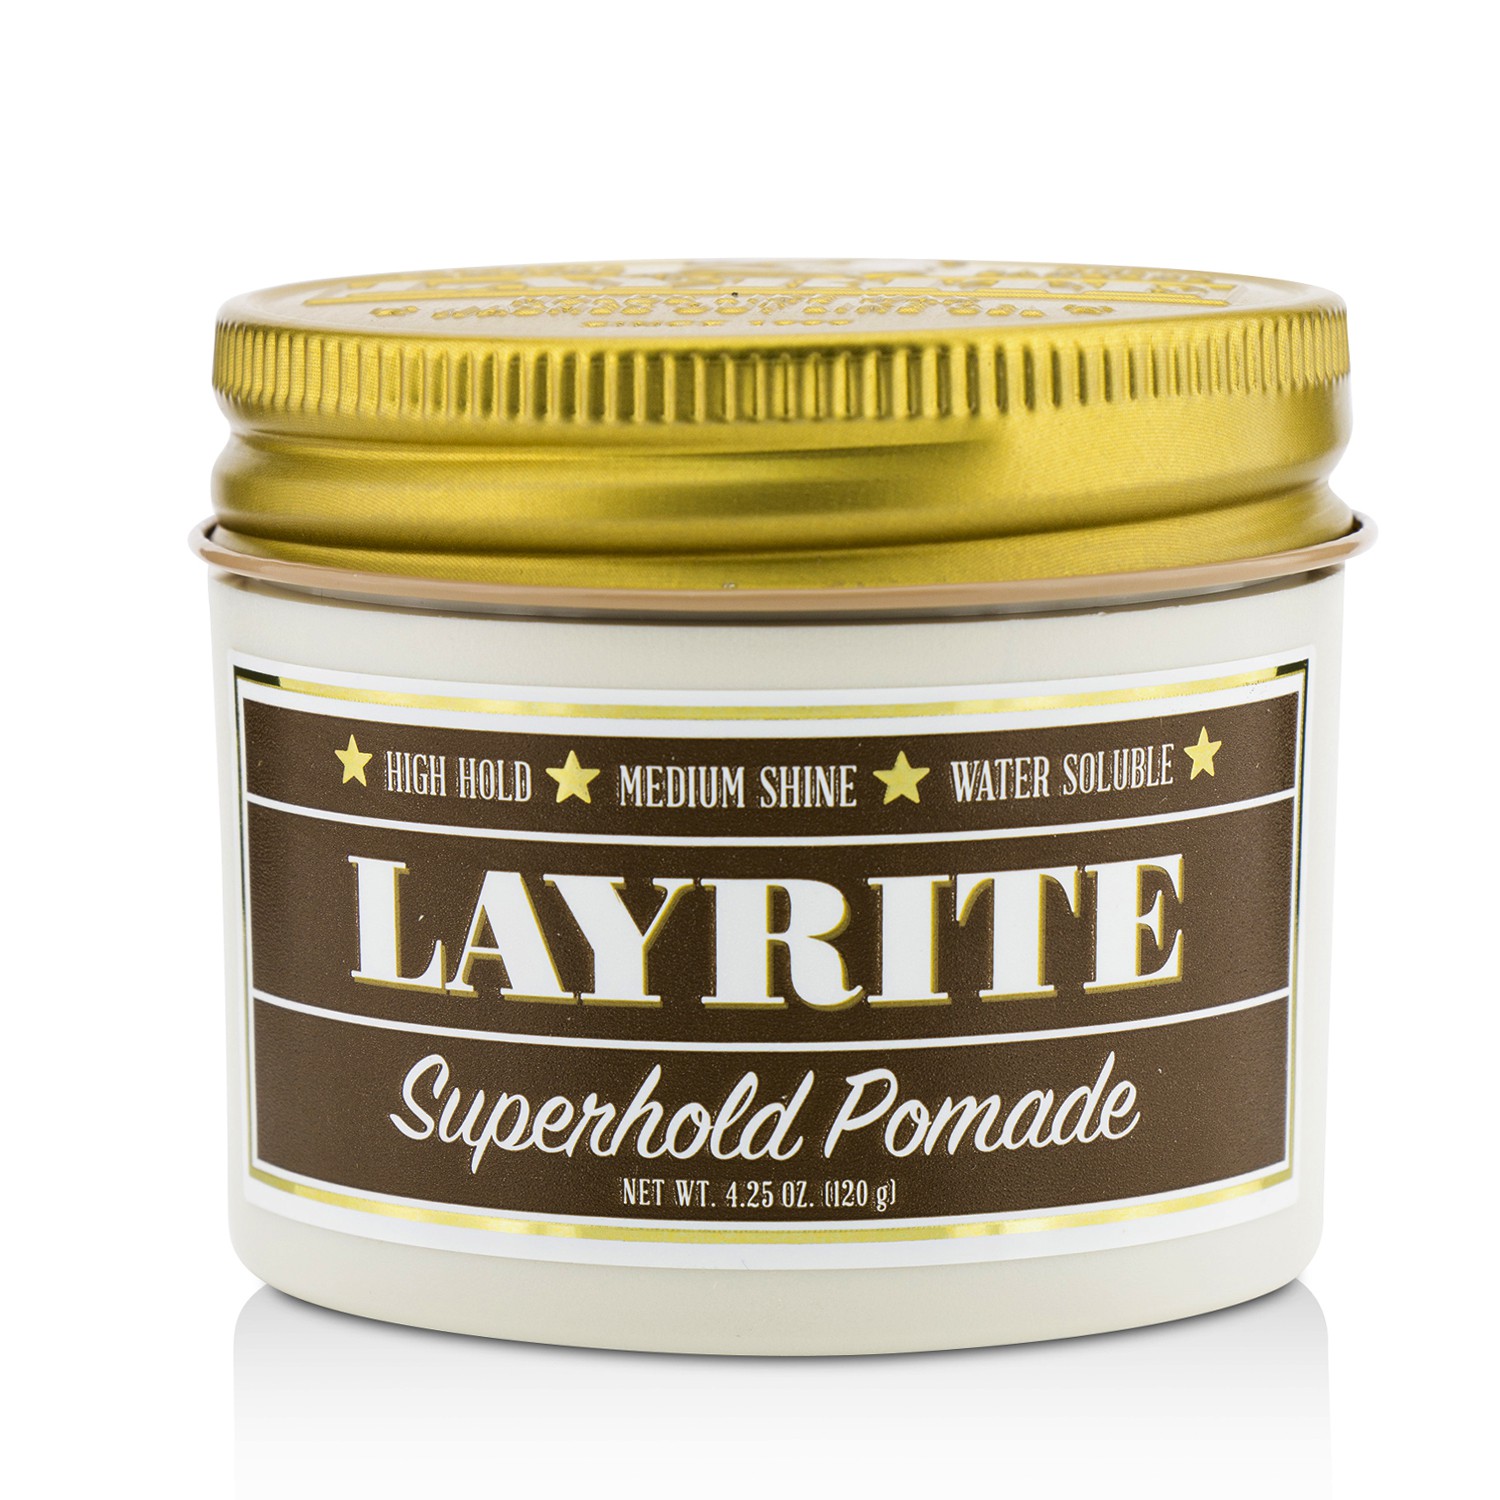 Superhold Pomade (High Hold Medium Shine Water Soluble) Layrite Image